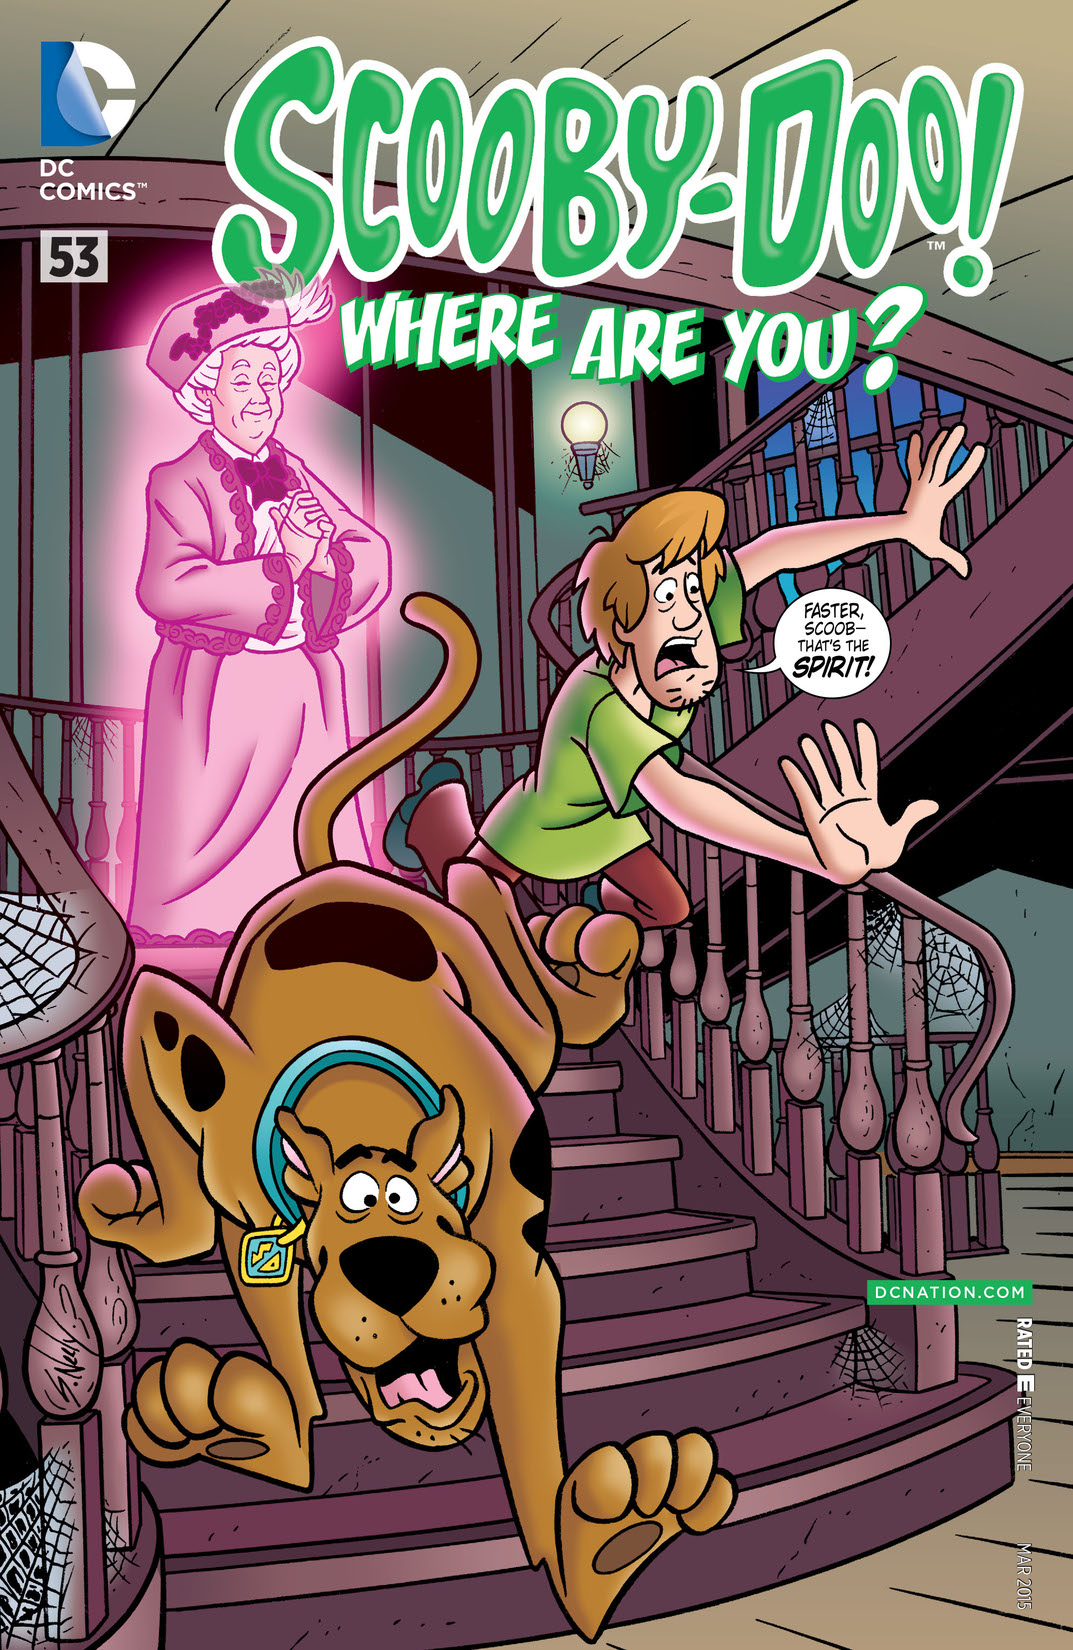 Scooby-Doo, Where Are You? #53 preview images